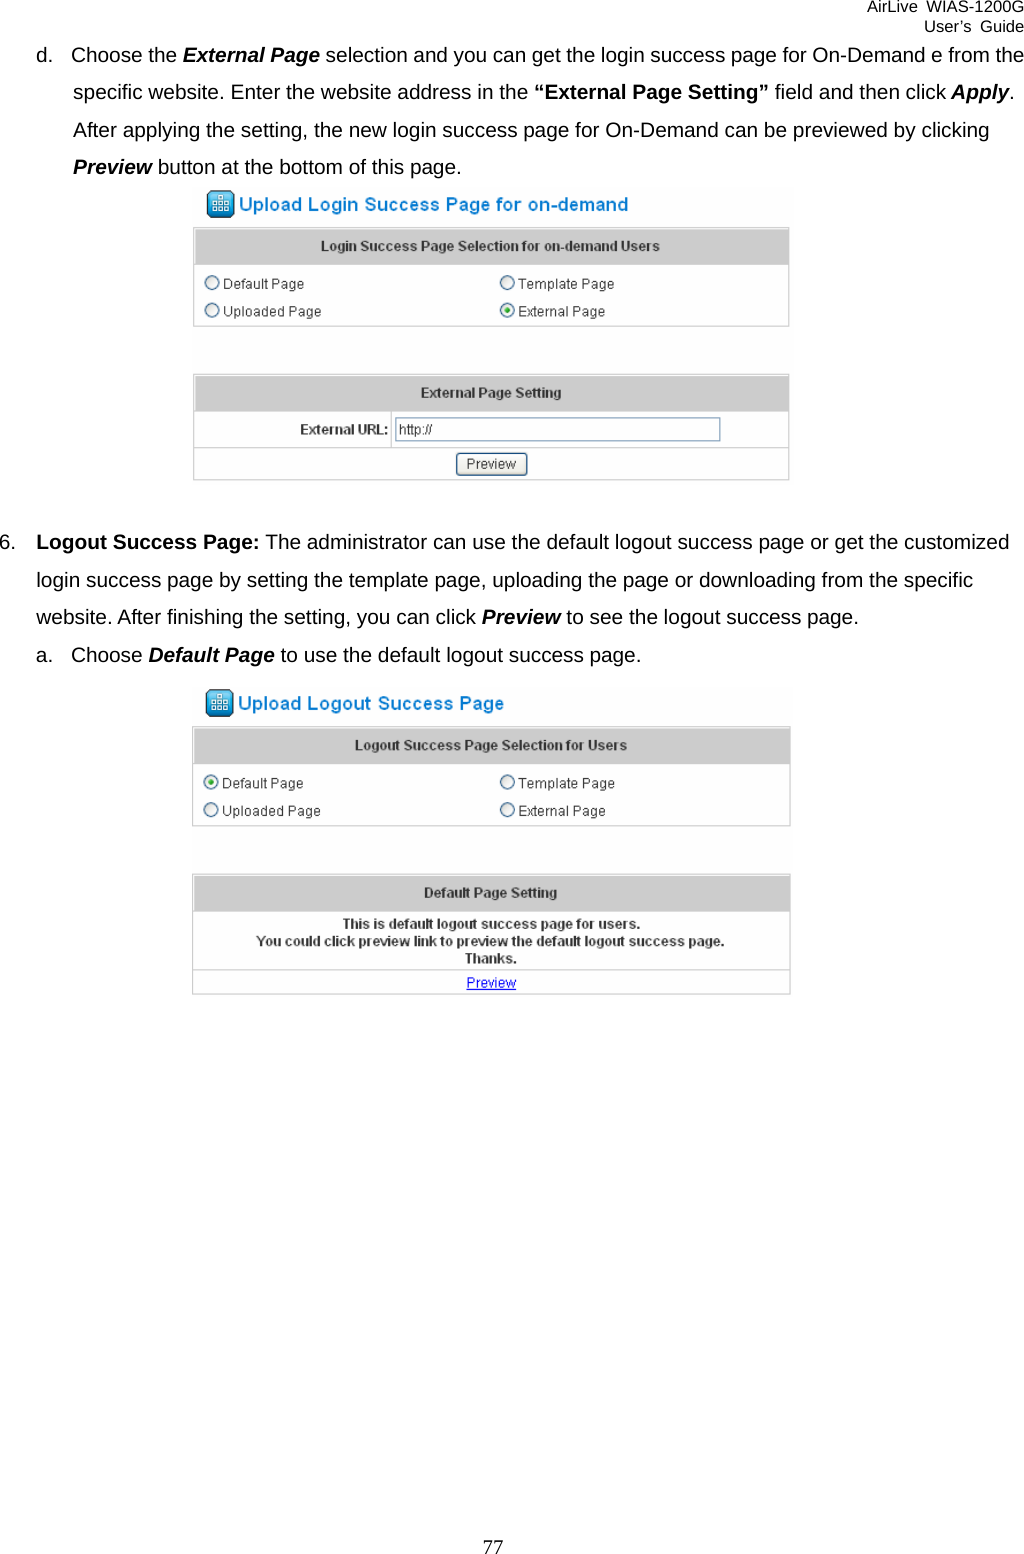 AirLive WIAS-1200G User’s Guide 77 d. Choose the External Page selection and you can get the login success page for On-Demand e from the specific website. Enter the website address in the “External Page Setting” field and then click Apply. After applying the setting, the new login success page for On-Demand can be previewed by clicking Preview button at the bottom of this page.   6.  Logout Success Page: The administrator can use the default logout success page or get the customized login success page by setting the template page, uploading the page or downloading from the specific website. After finishing the setting, you can click Preview to see the logout success page.   a. Choose Default Page to use the default logout success page.  